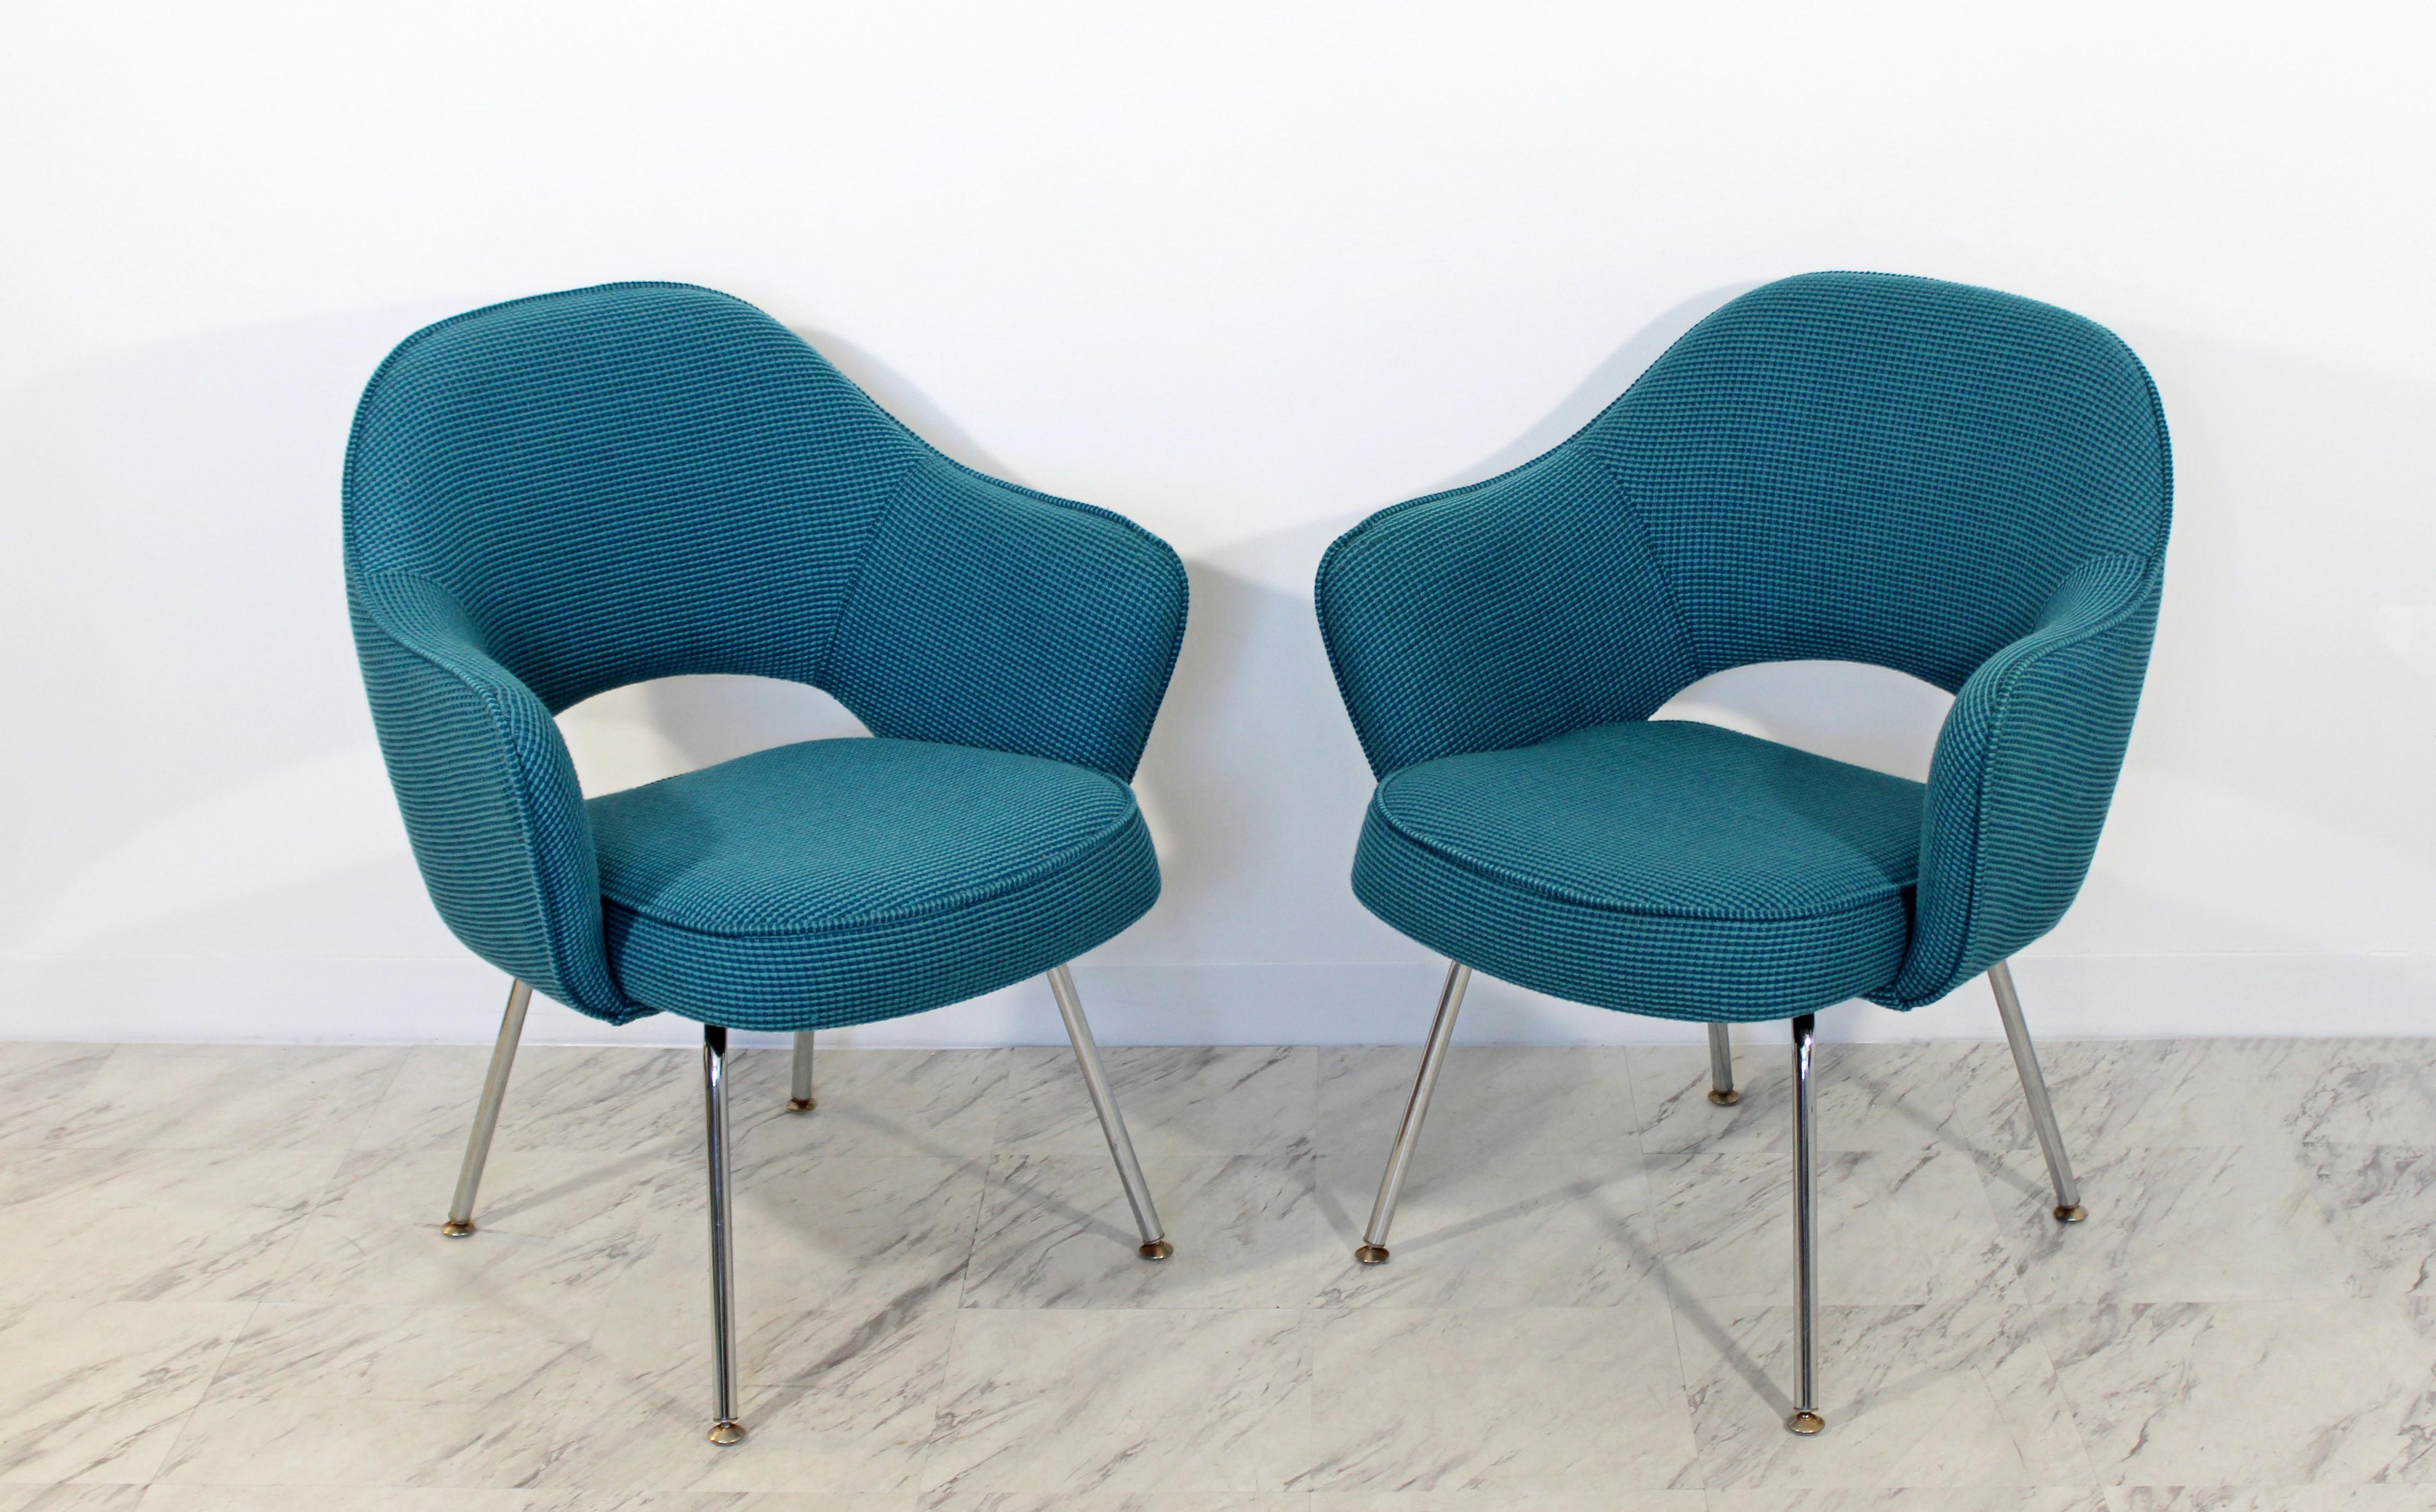 For your consideration is a sculptural pair of executive office armchairs, with a fabulous turquoise wool upholstery, by Eero Saarinen for Knoll, circa 1960s. In excellent condition. The dimensions are 27